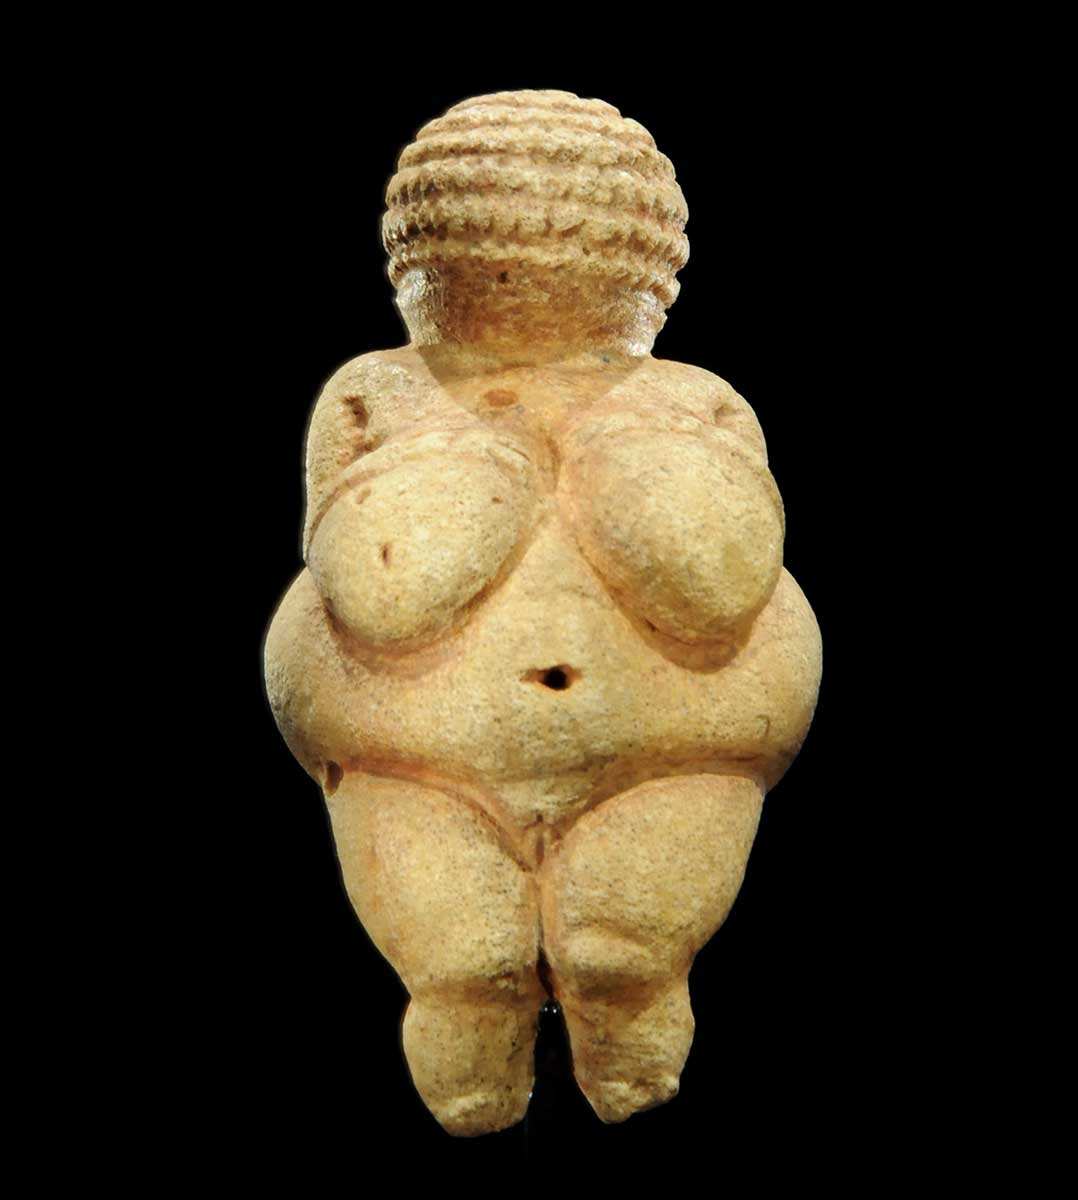 <p></p><ul><li><p>Description: Small limestone figurine of a female with exaggerated features</p></li><li><p>Size: Approximately 4.4 inches tall</p></li><li><p>Features: Large breasts, rounded belly, wide hips, no facial features</p></li></ul>